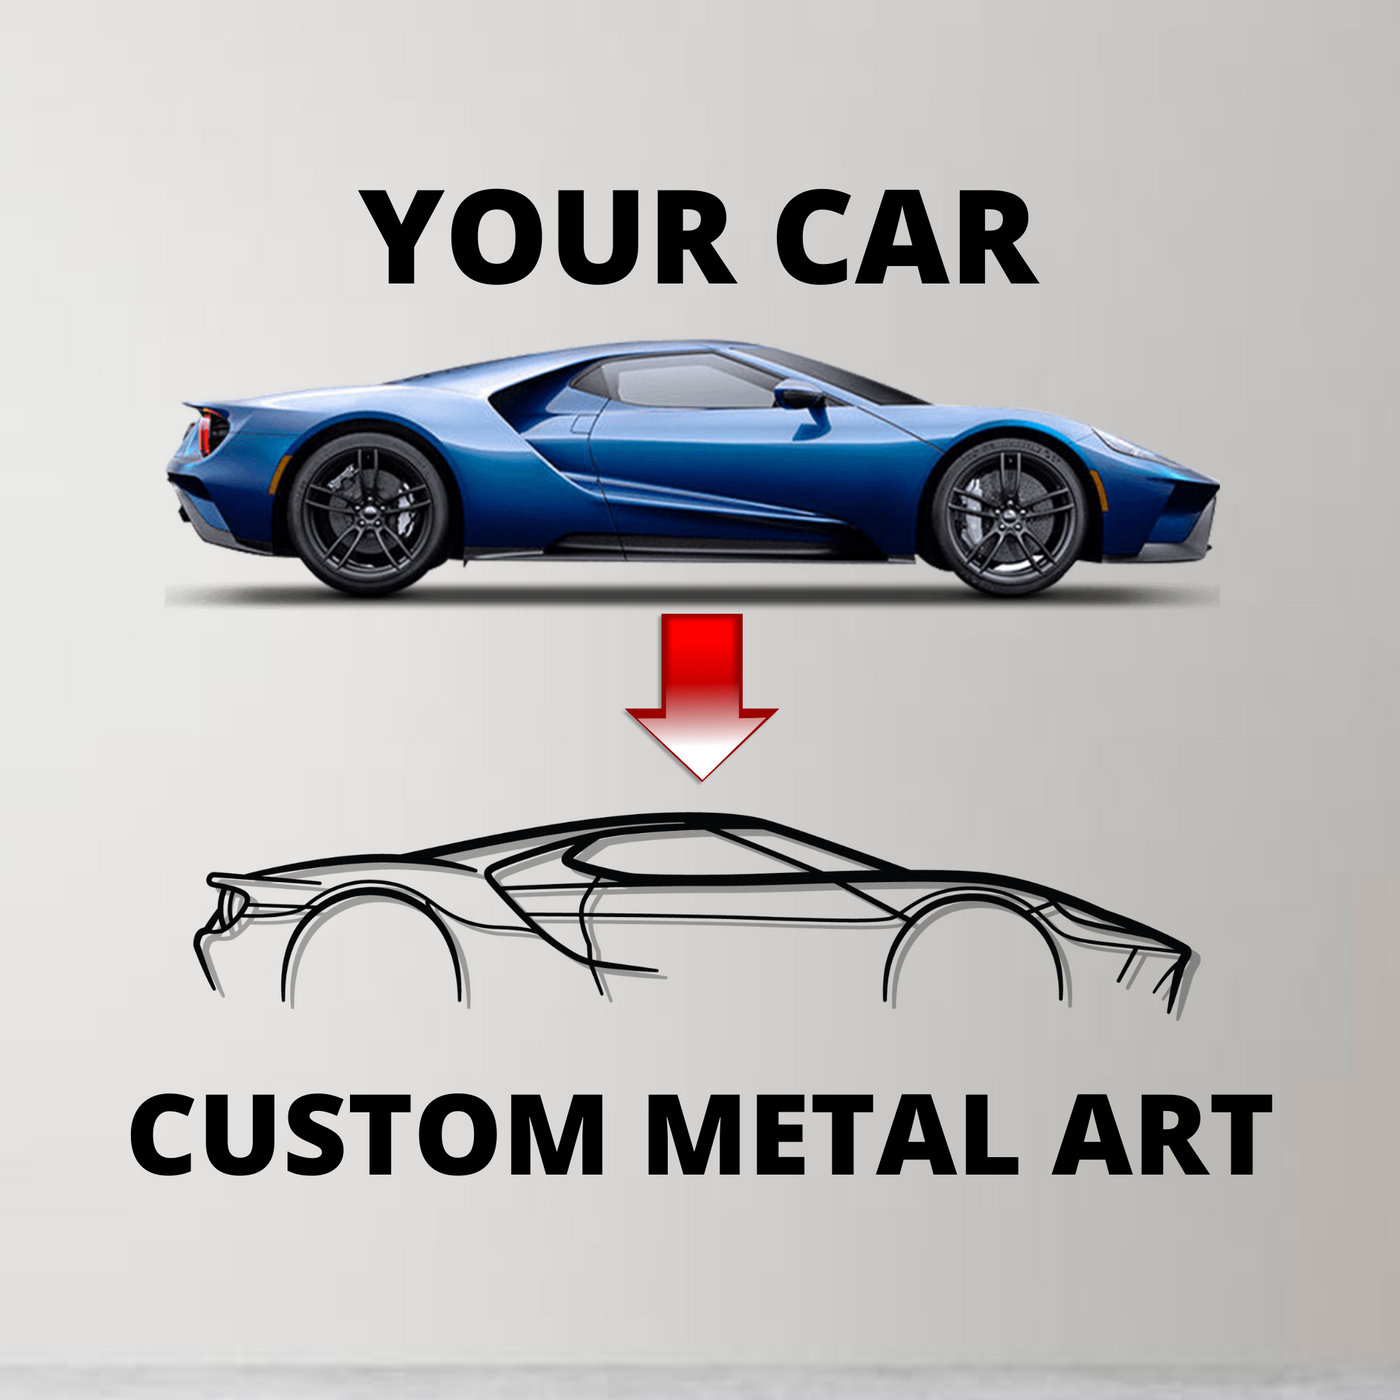 987 Boxster Spyder 2011 Classic Silhouette Metal Wall Art